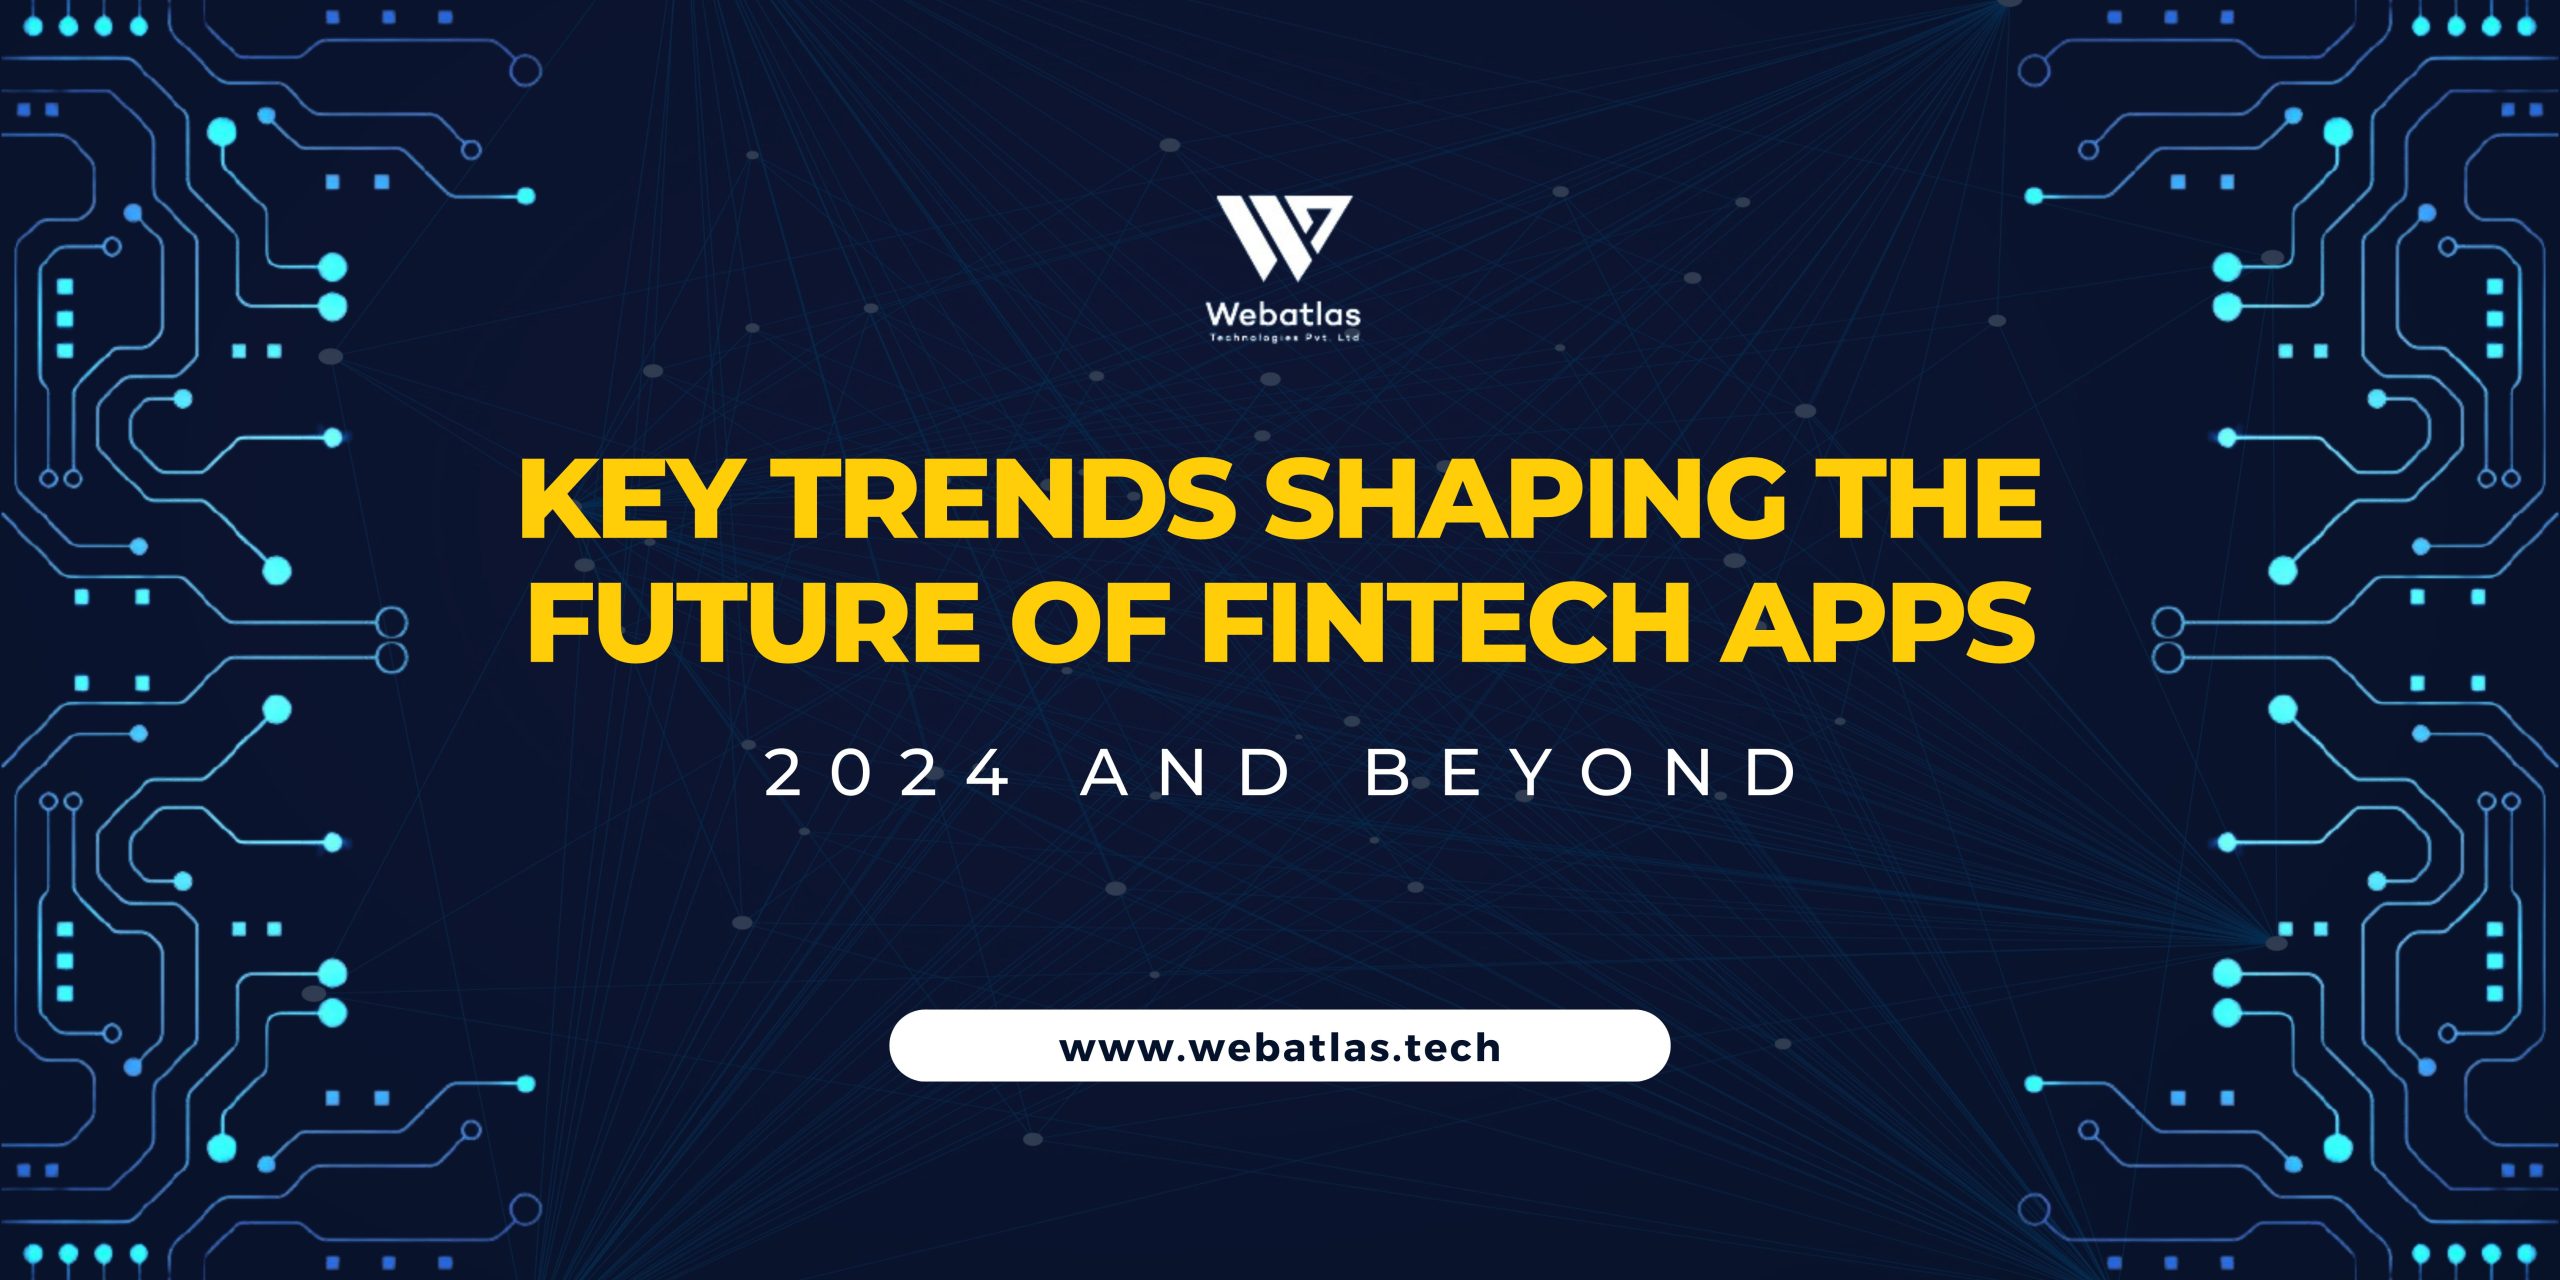 The Future of Fintech Apps: What to Expect in 2024 and Beyond